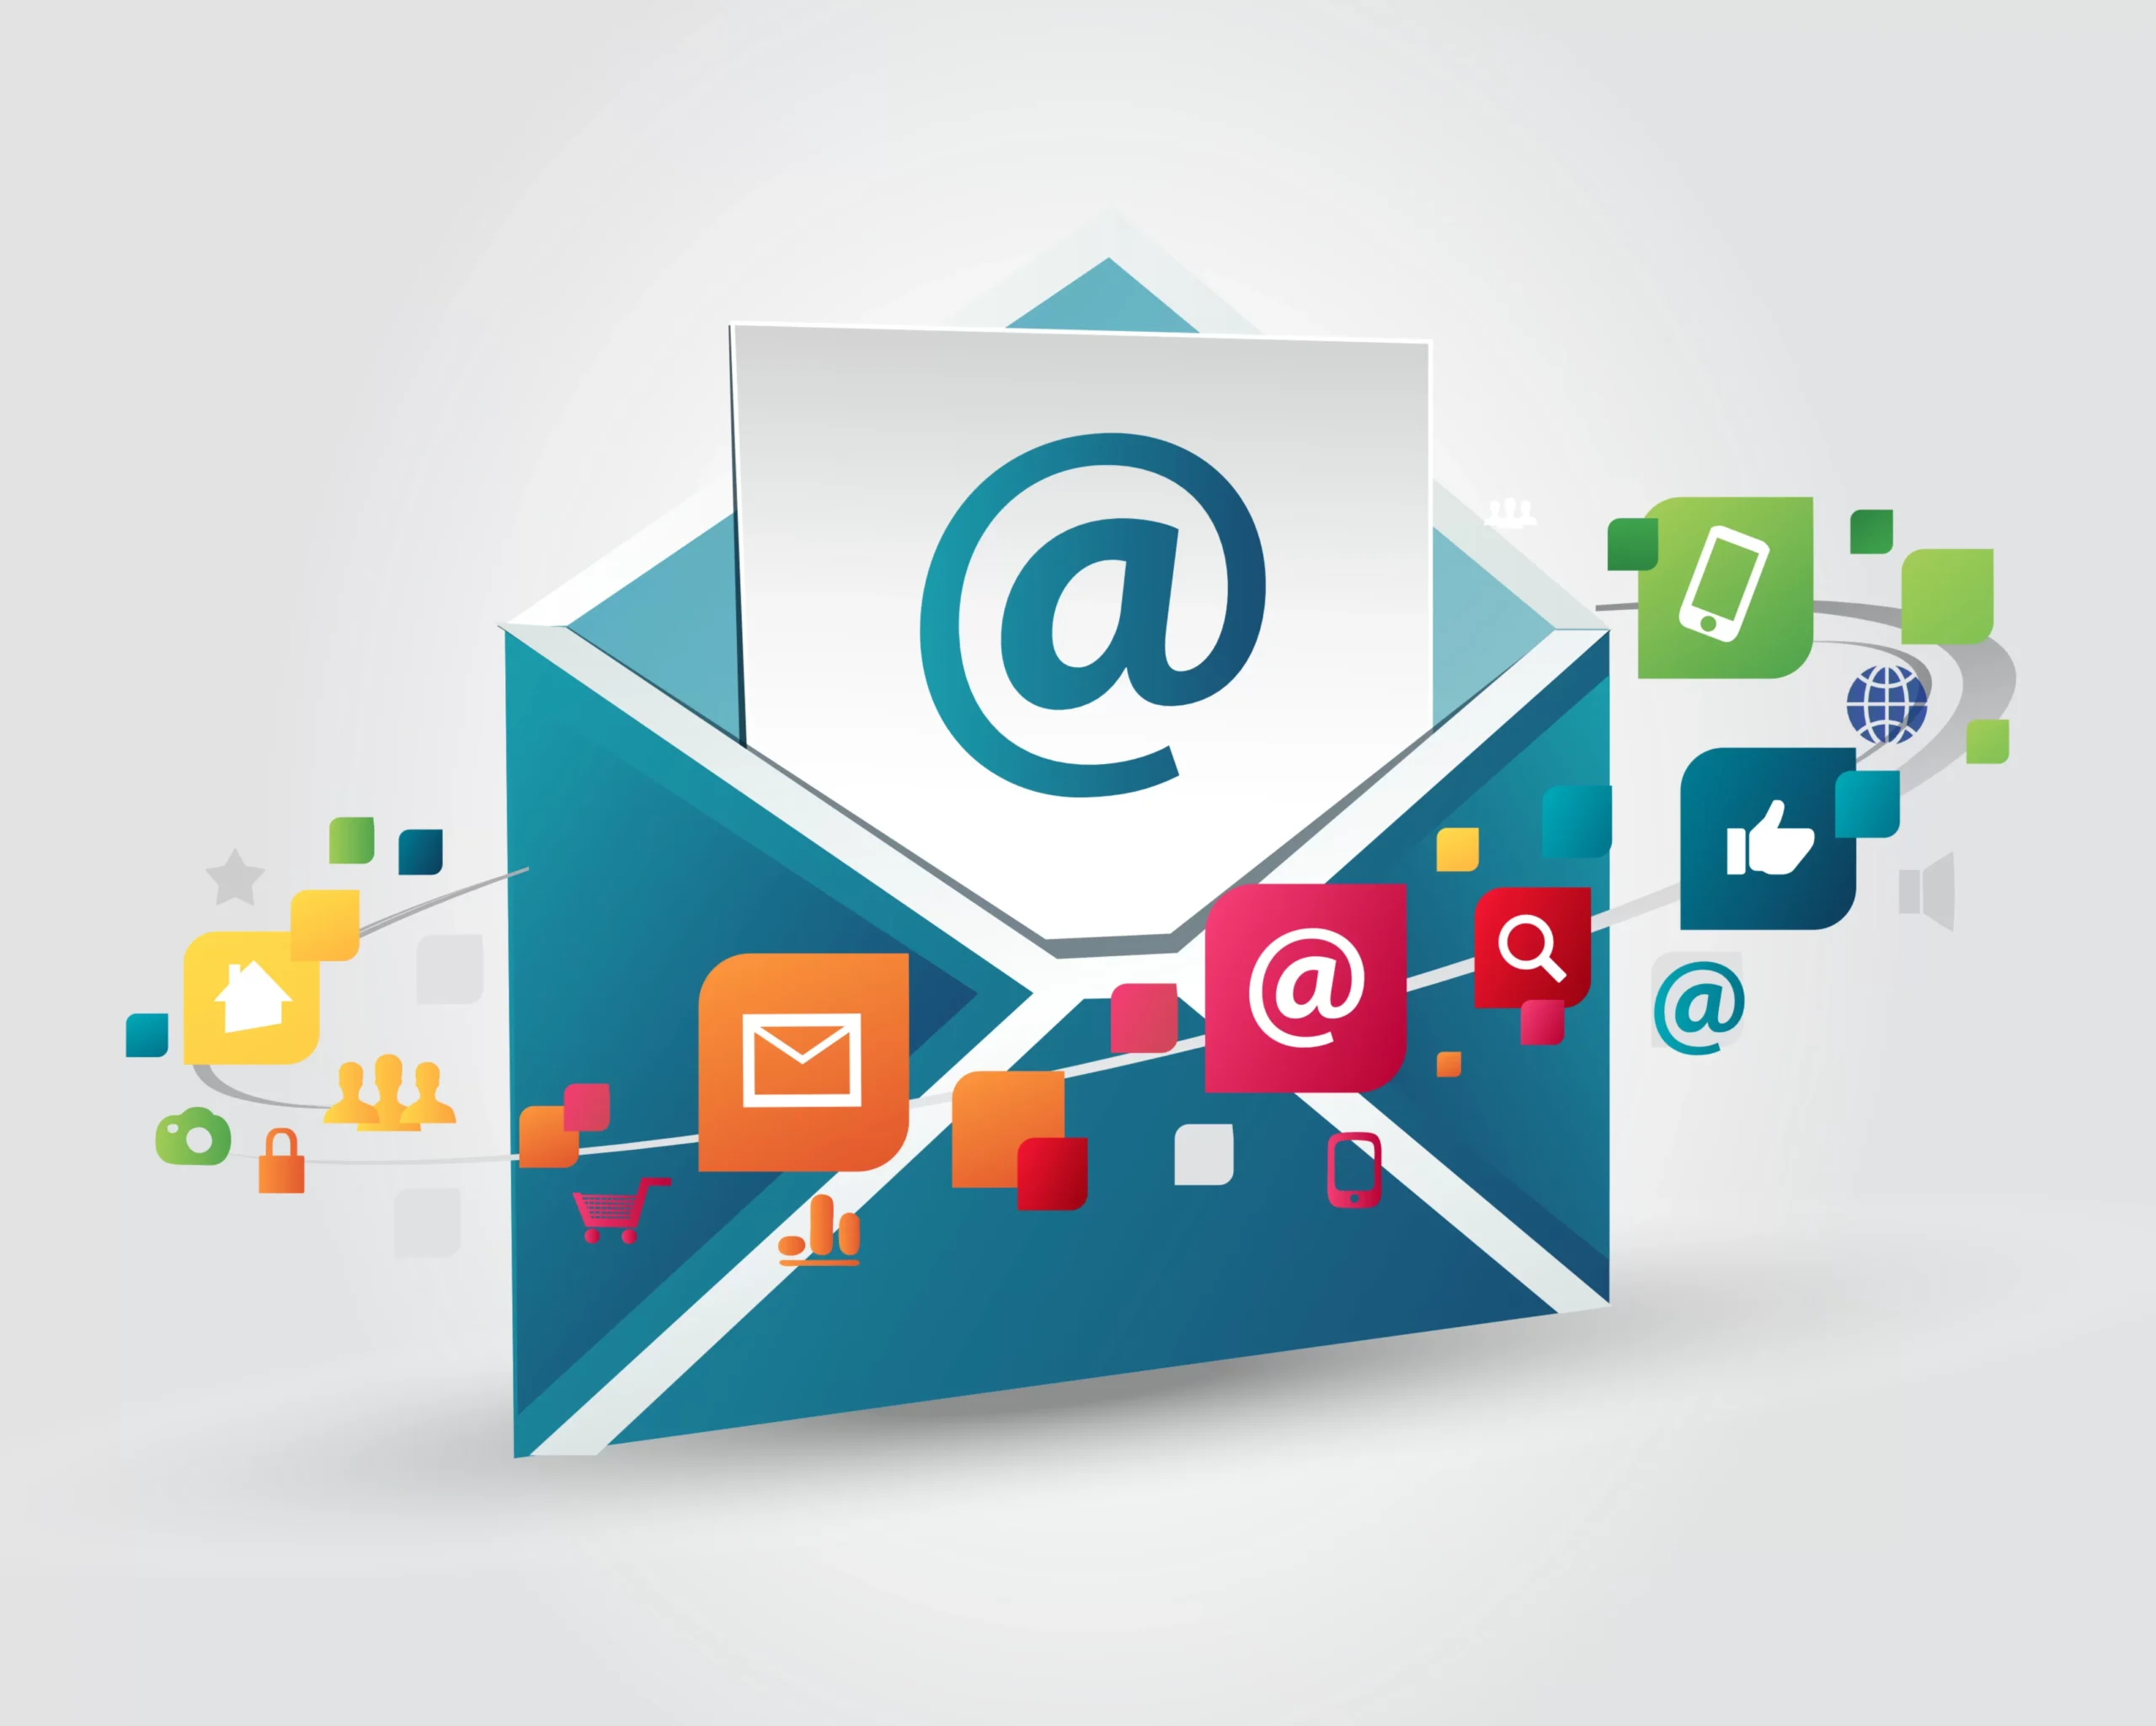 A vibrant illustration of an open envelope with the '@' symbol, signifying email communication, surrounded by icons of social media, shopping, security, and technology. This image represents the seamless integration of email marketing and social media tools with European web hosting services, highlighting the importance of comprehensive digital marketing strategies in today's web technology landscape. Ideal for businesses looking to enhance their online presence with robust hosting and marketing solutions in Europe.